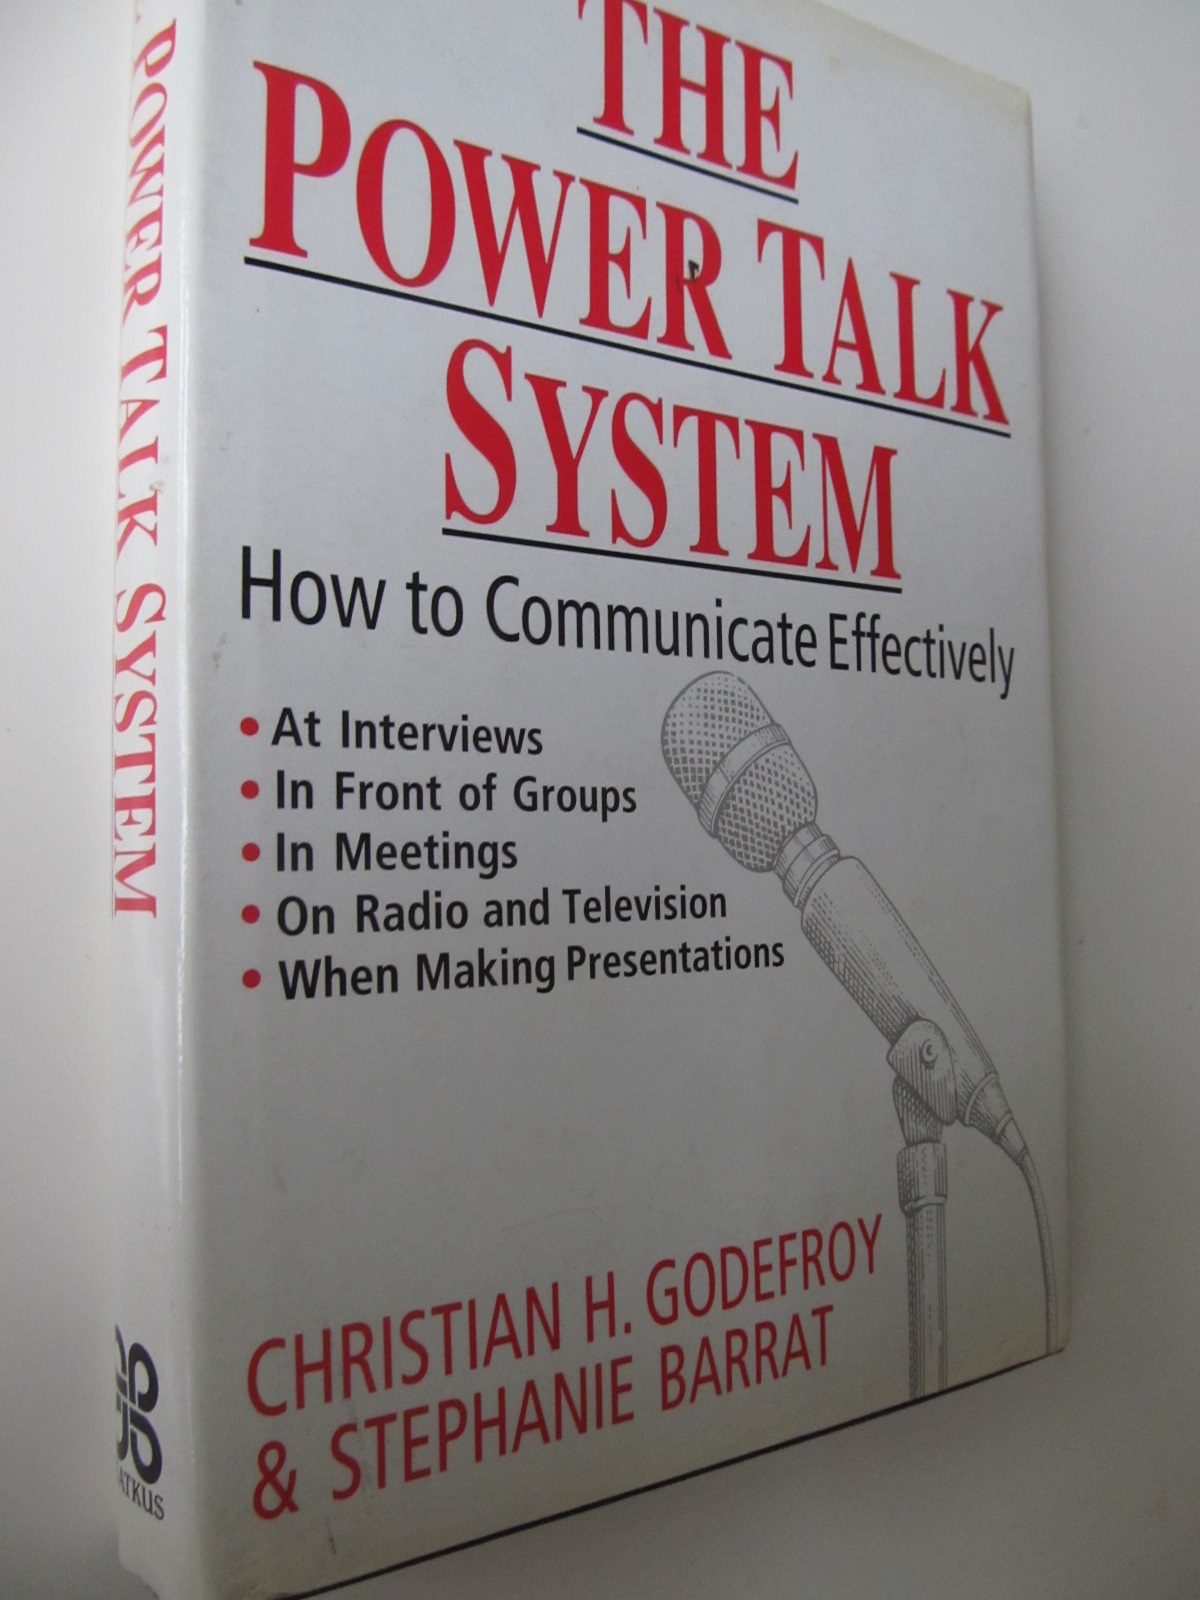 The power talk system - How to communicate effectively - Christian Godefroy , Stephanie Barrat | Detalii carte